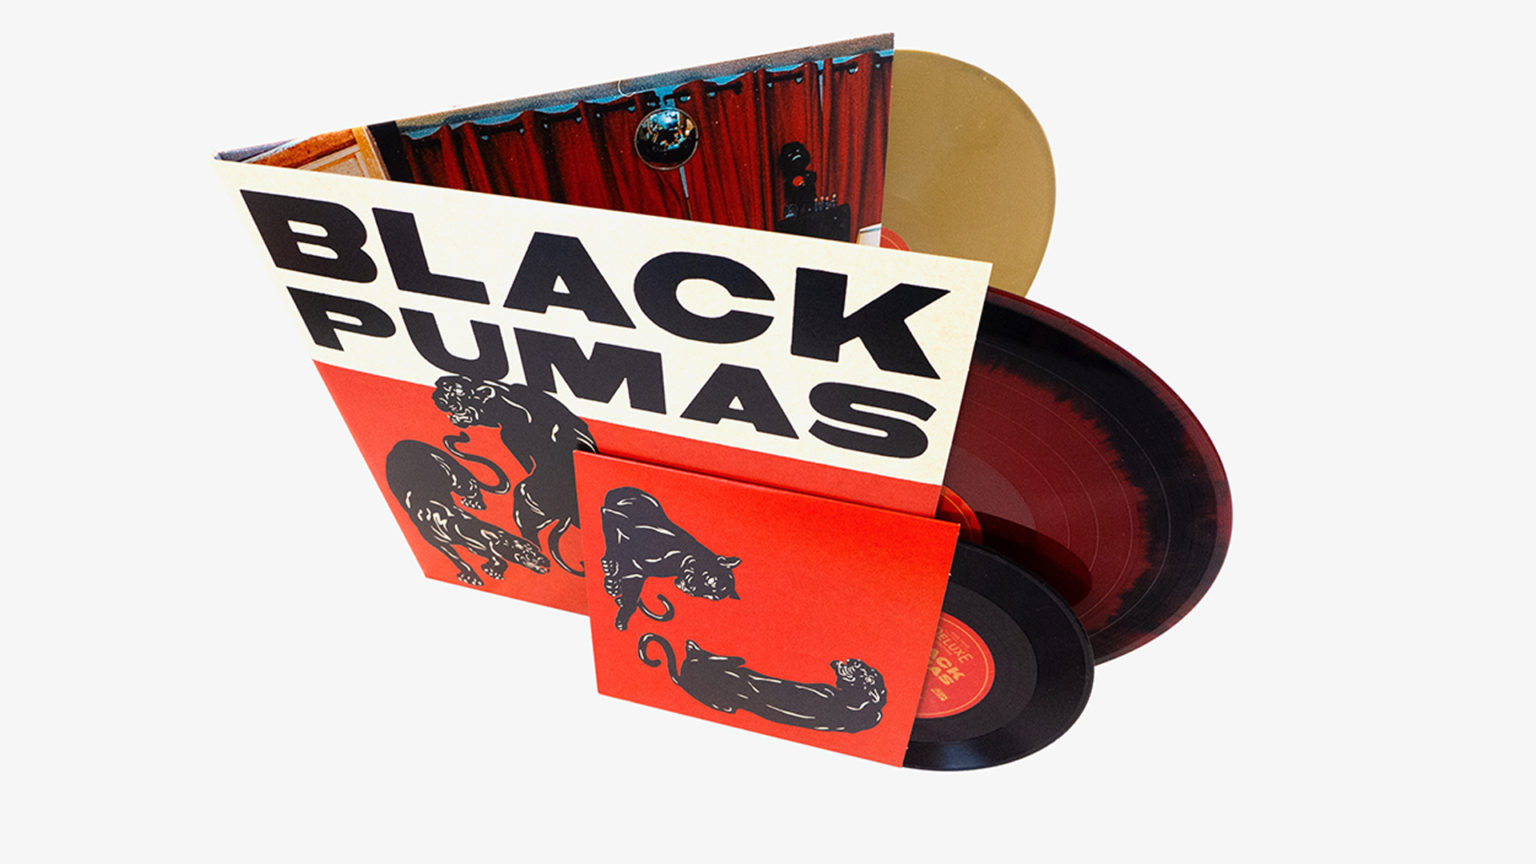 Black Pumas Deluxe Edition Available Now In Stores - ATO RECORDS